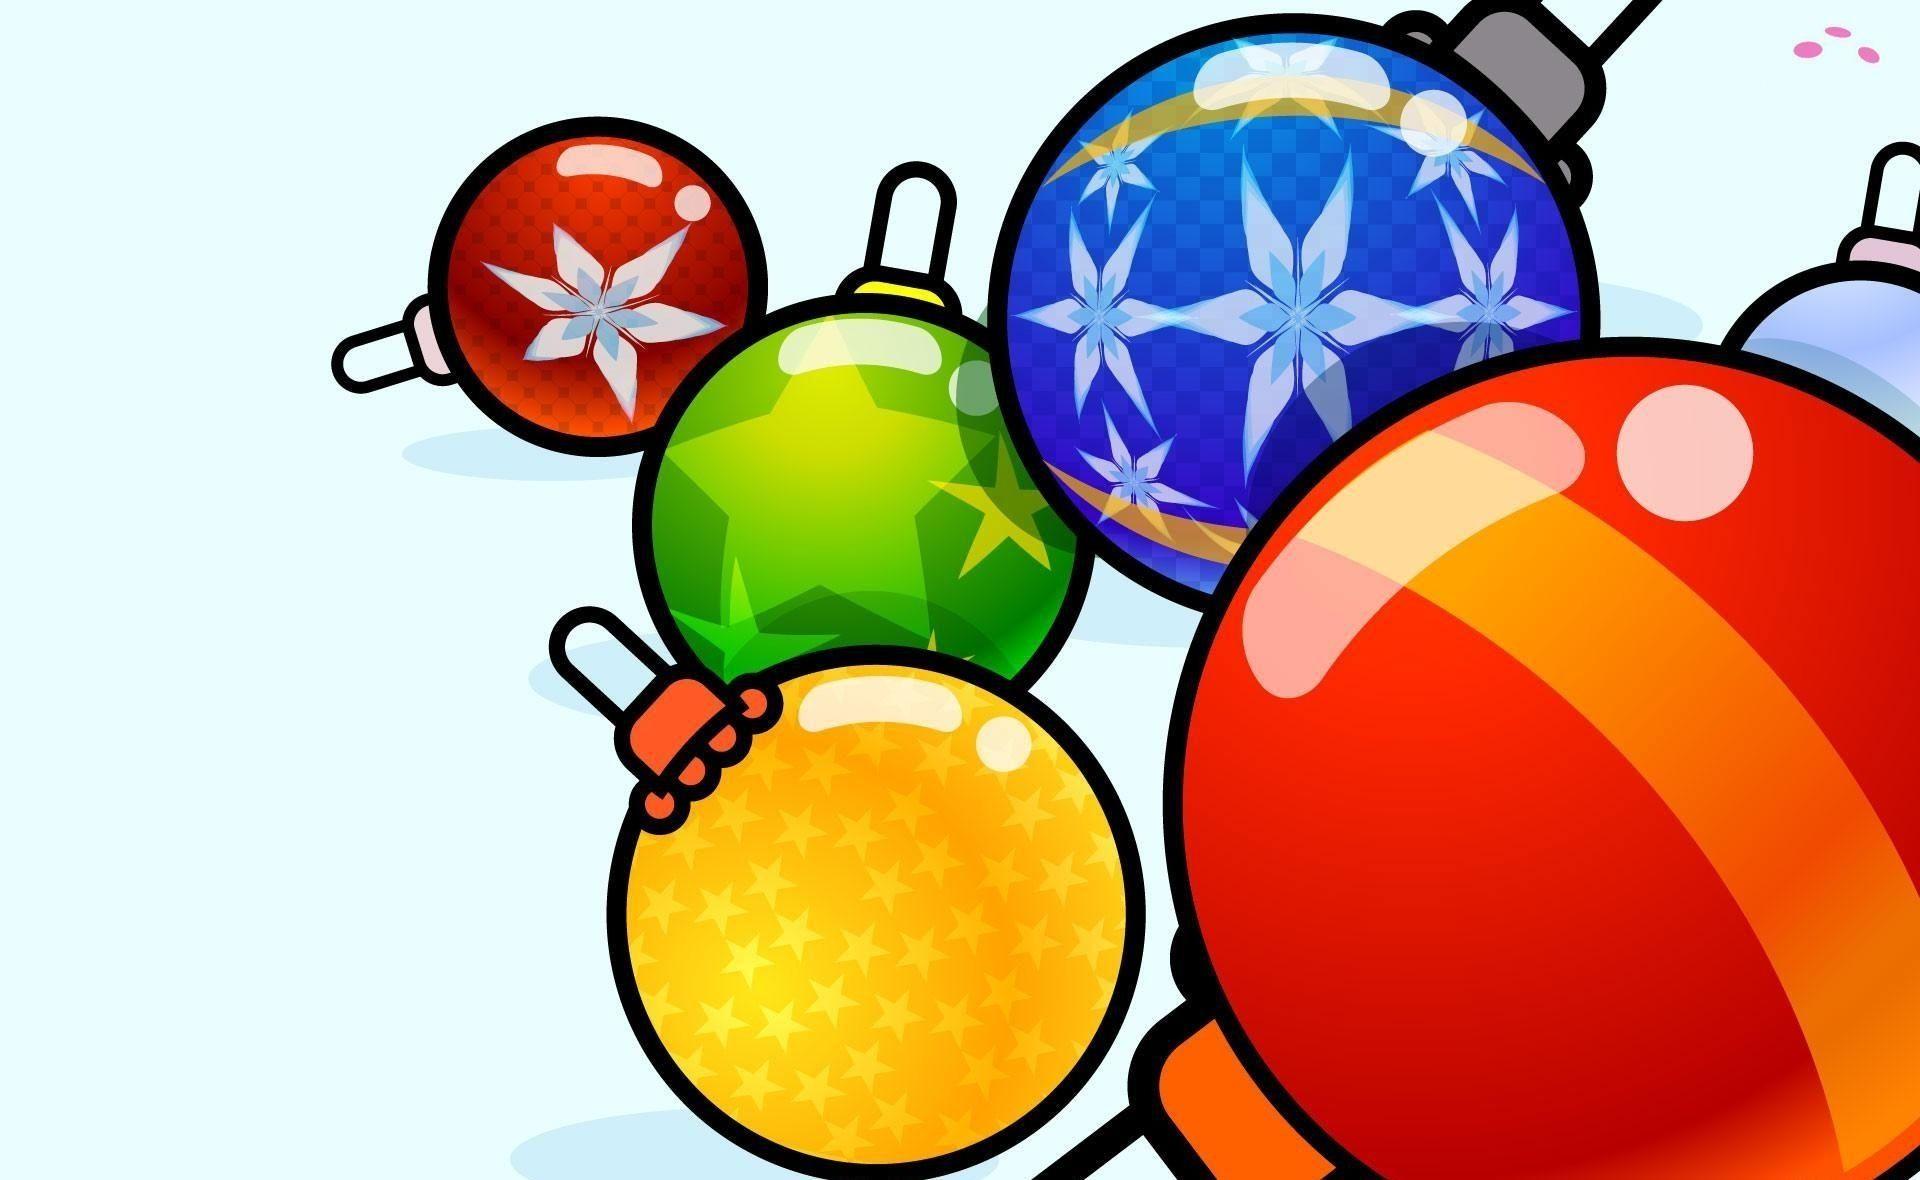 Christmas Decorations Balloons Diversity Wallpaper Photo and Image